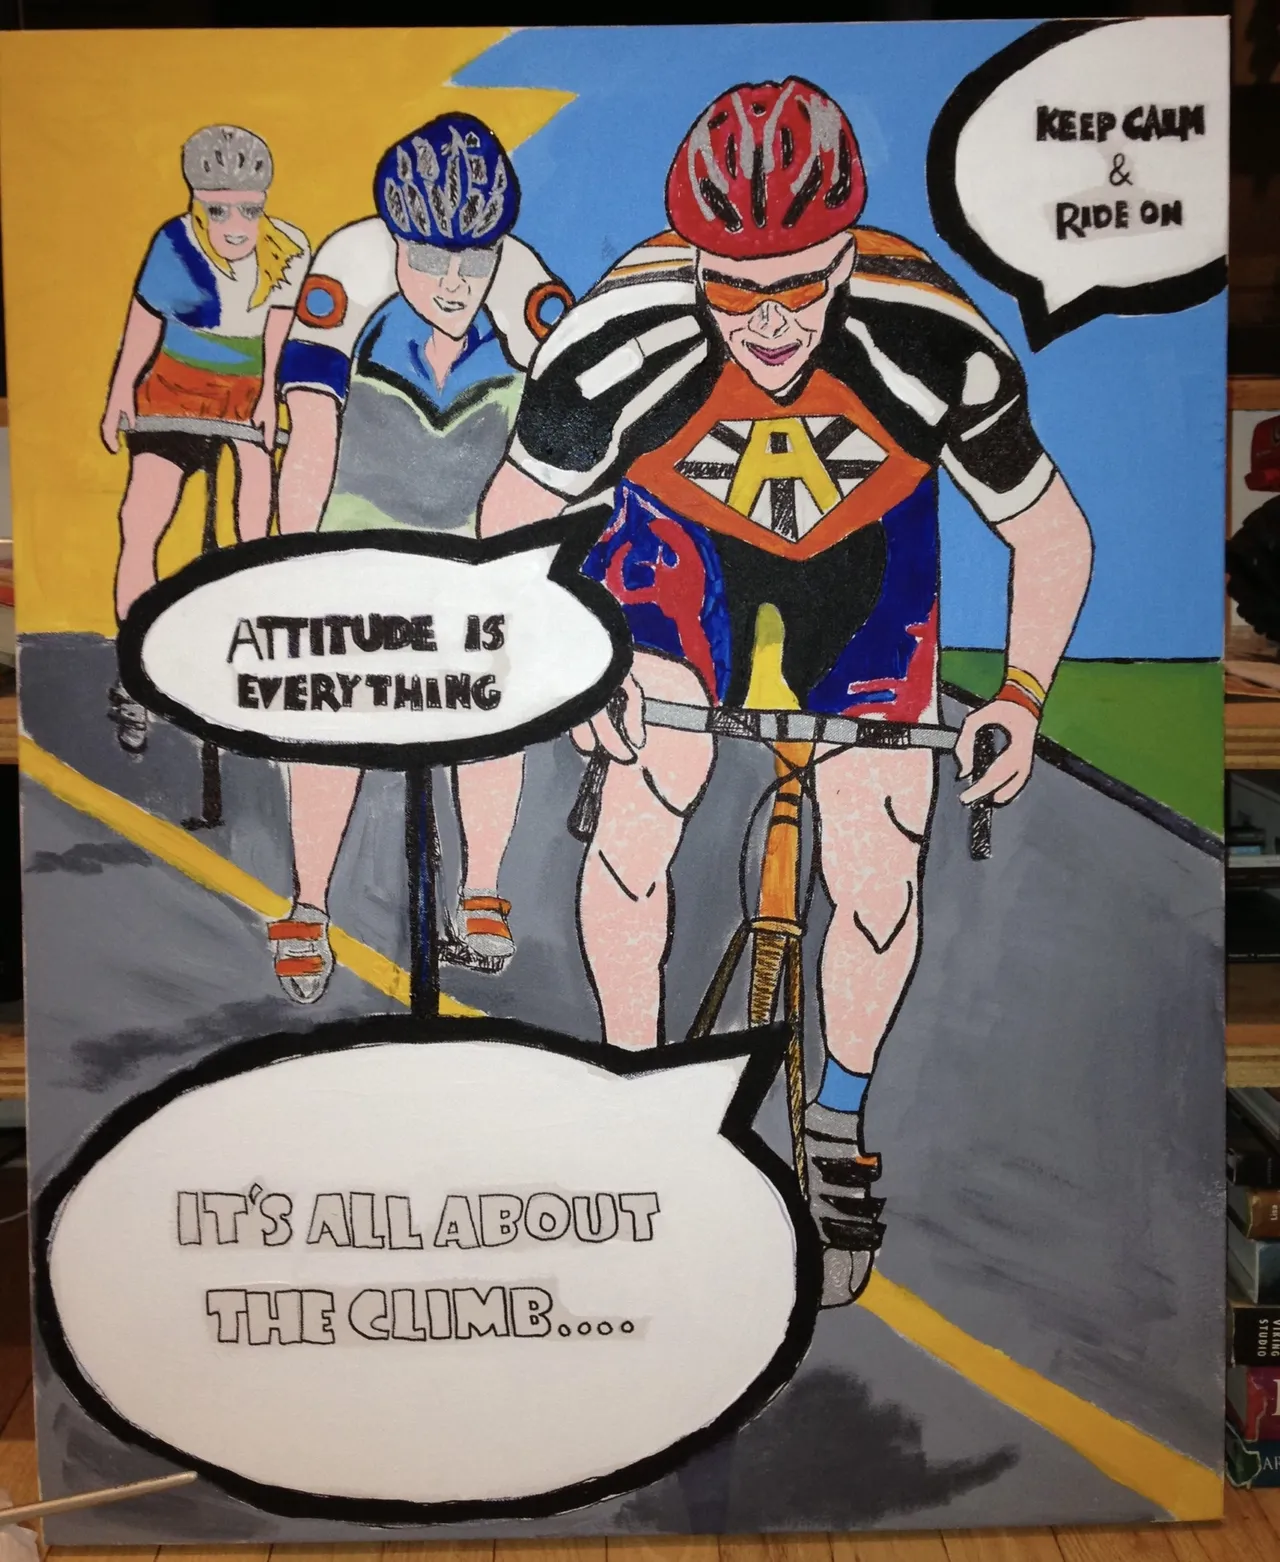 A painting of three people on bicycles with speech bubbles.